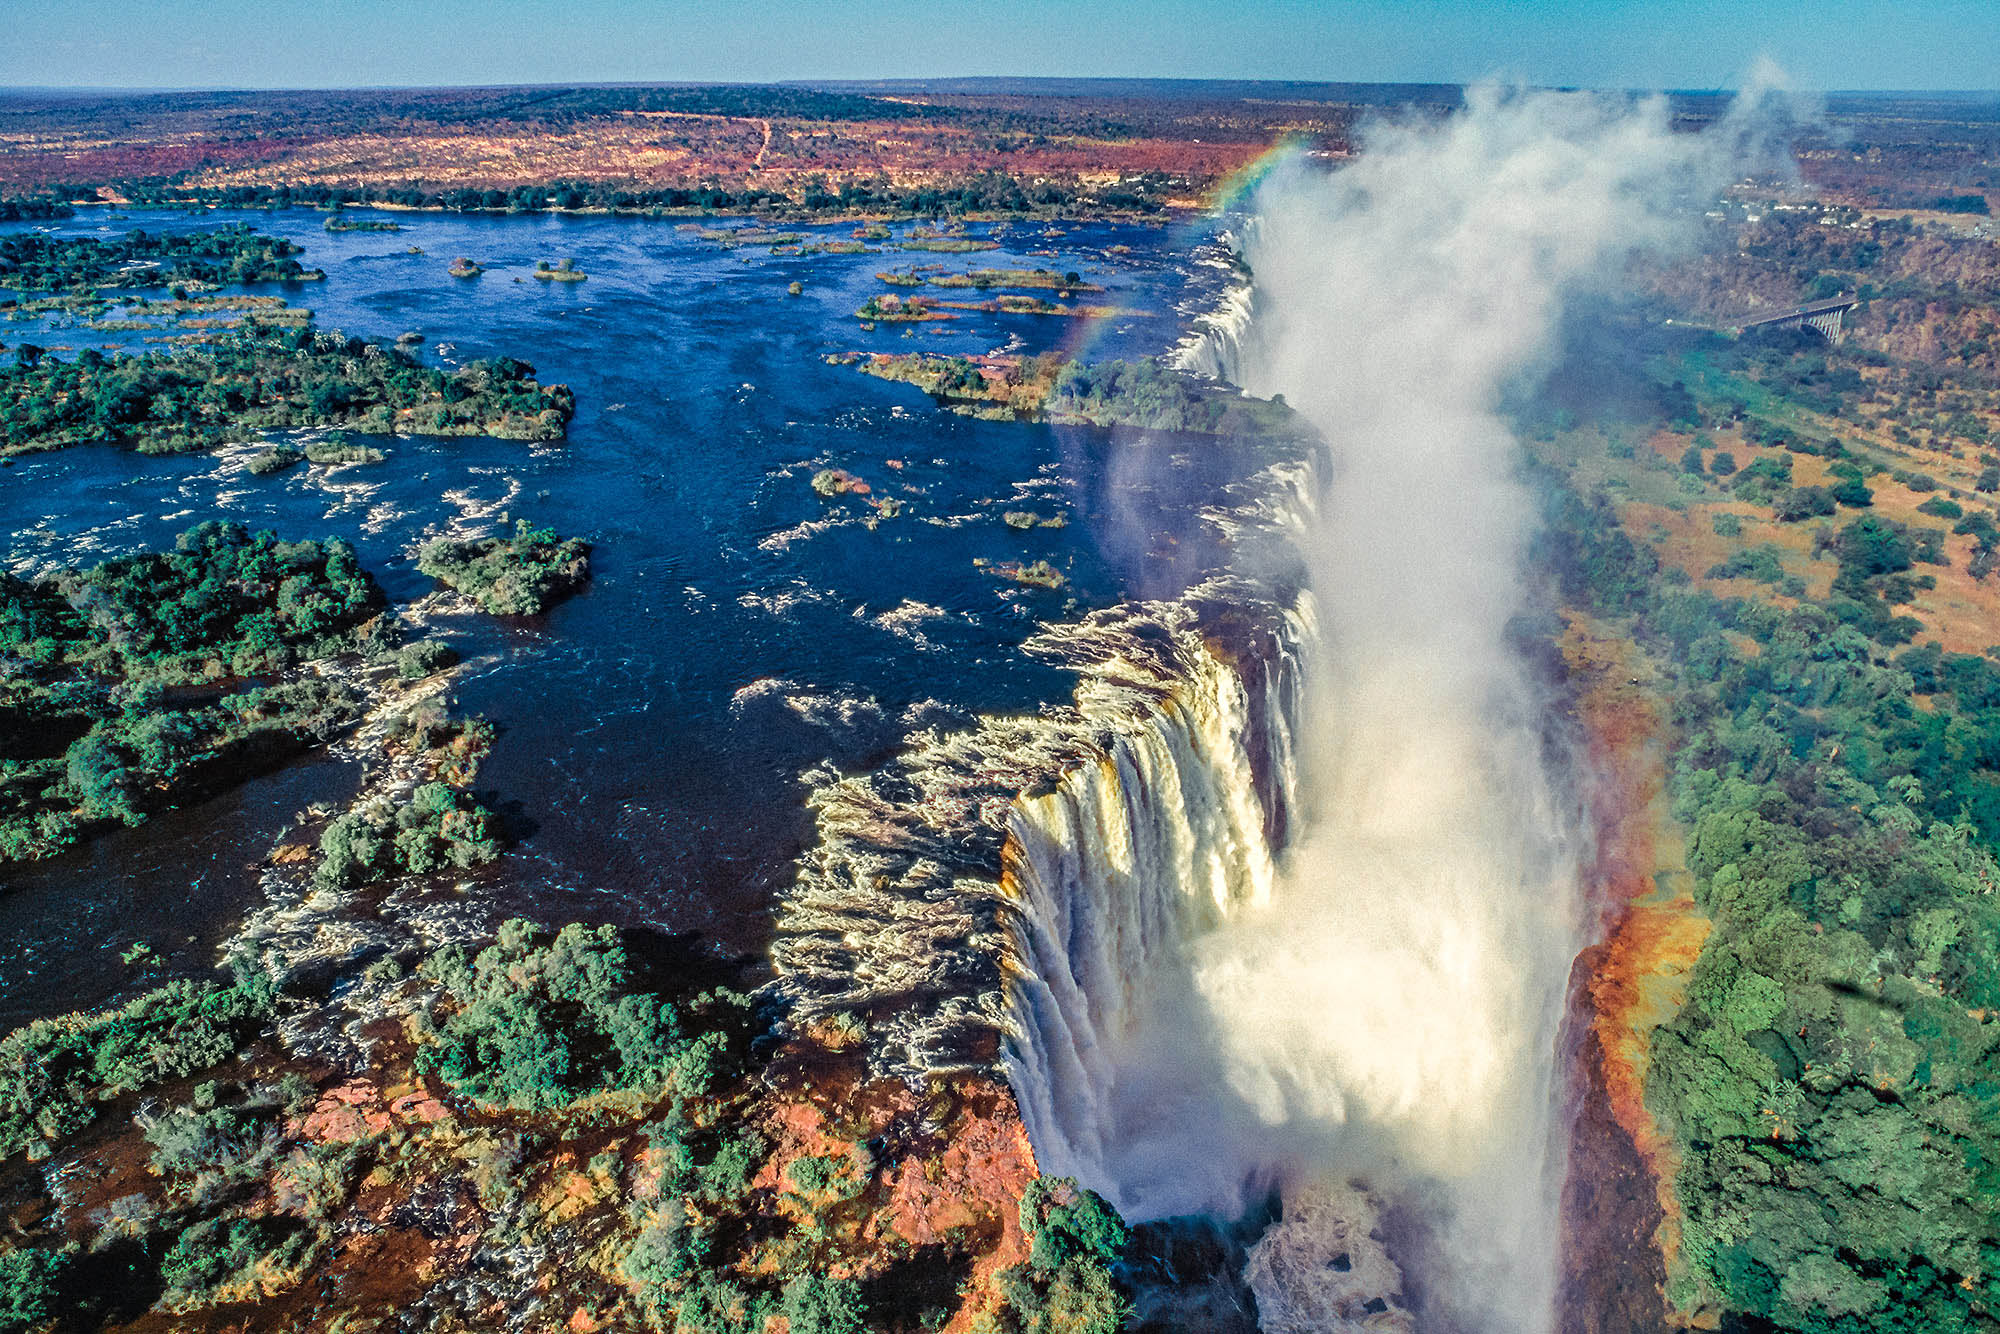 One for the bucket list: a bird’s-eye view of Zambia’s Victoria Falls, the largest waterfall in the world